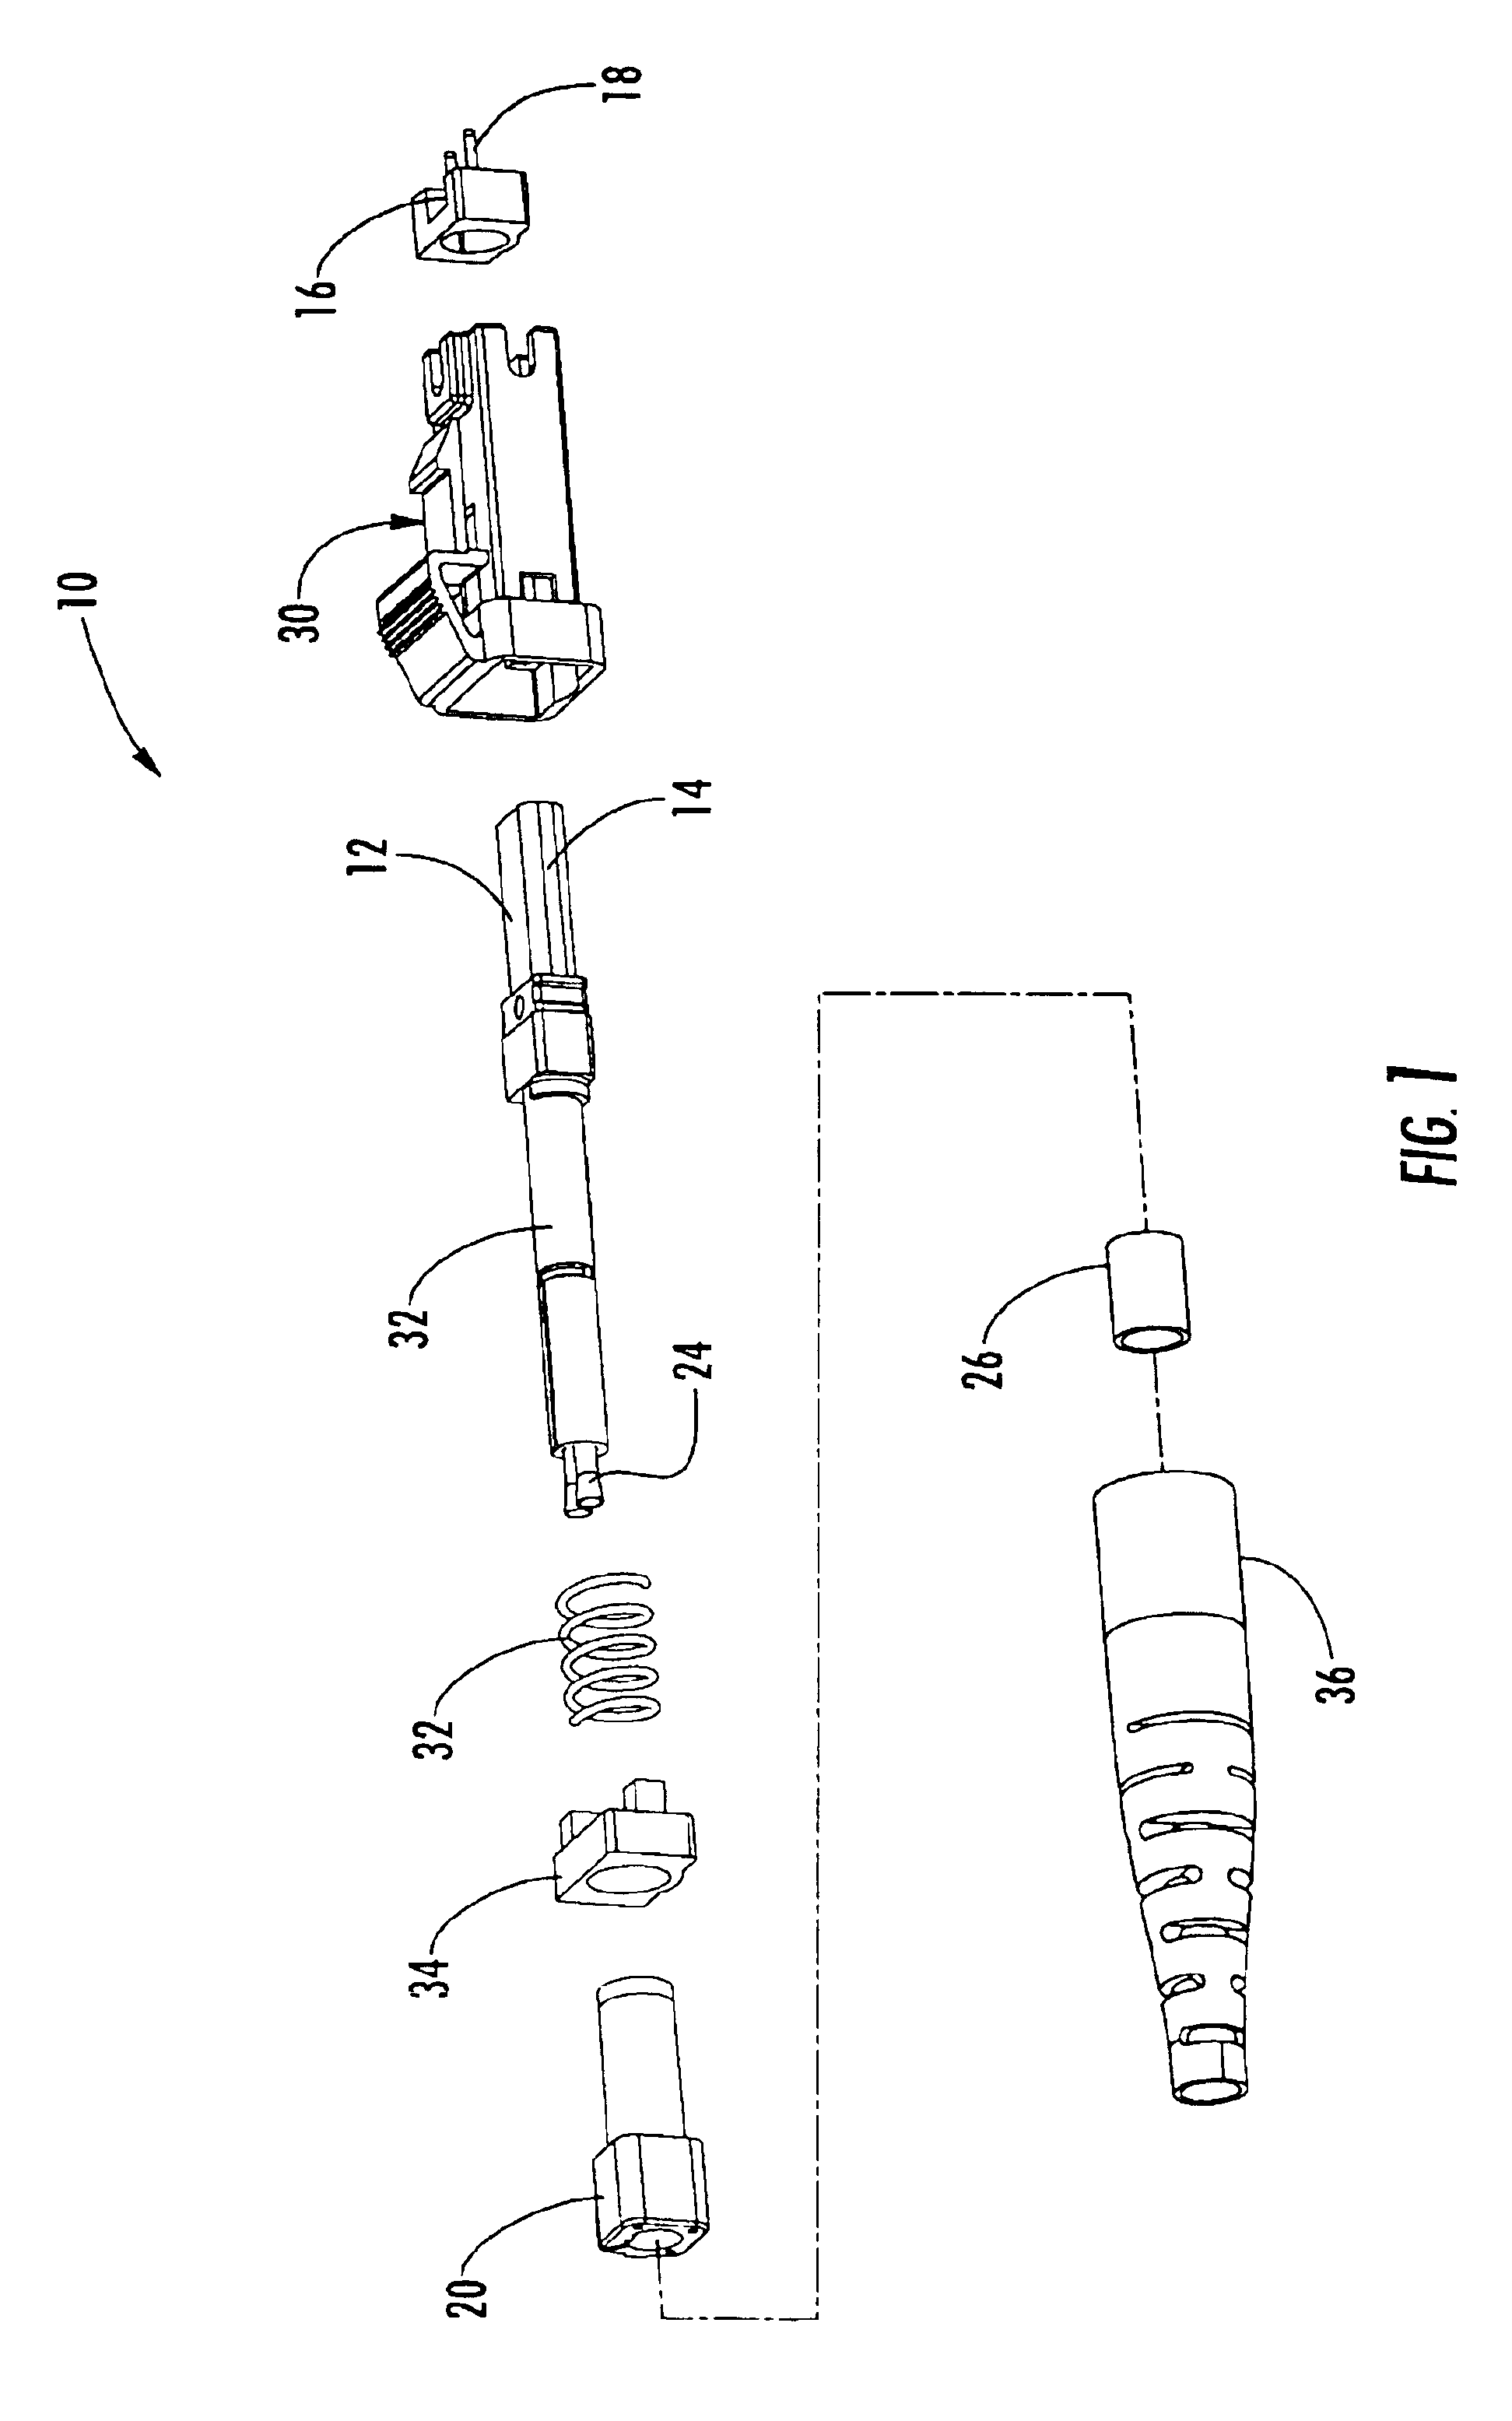 Multifiber connector, installation tool and associated methods of validating optical fiber continuity